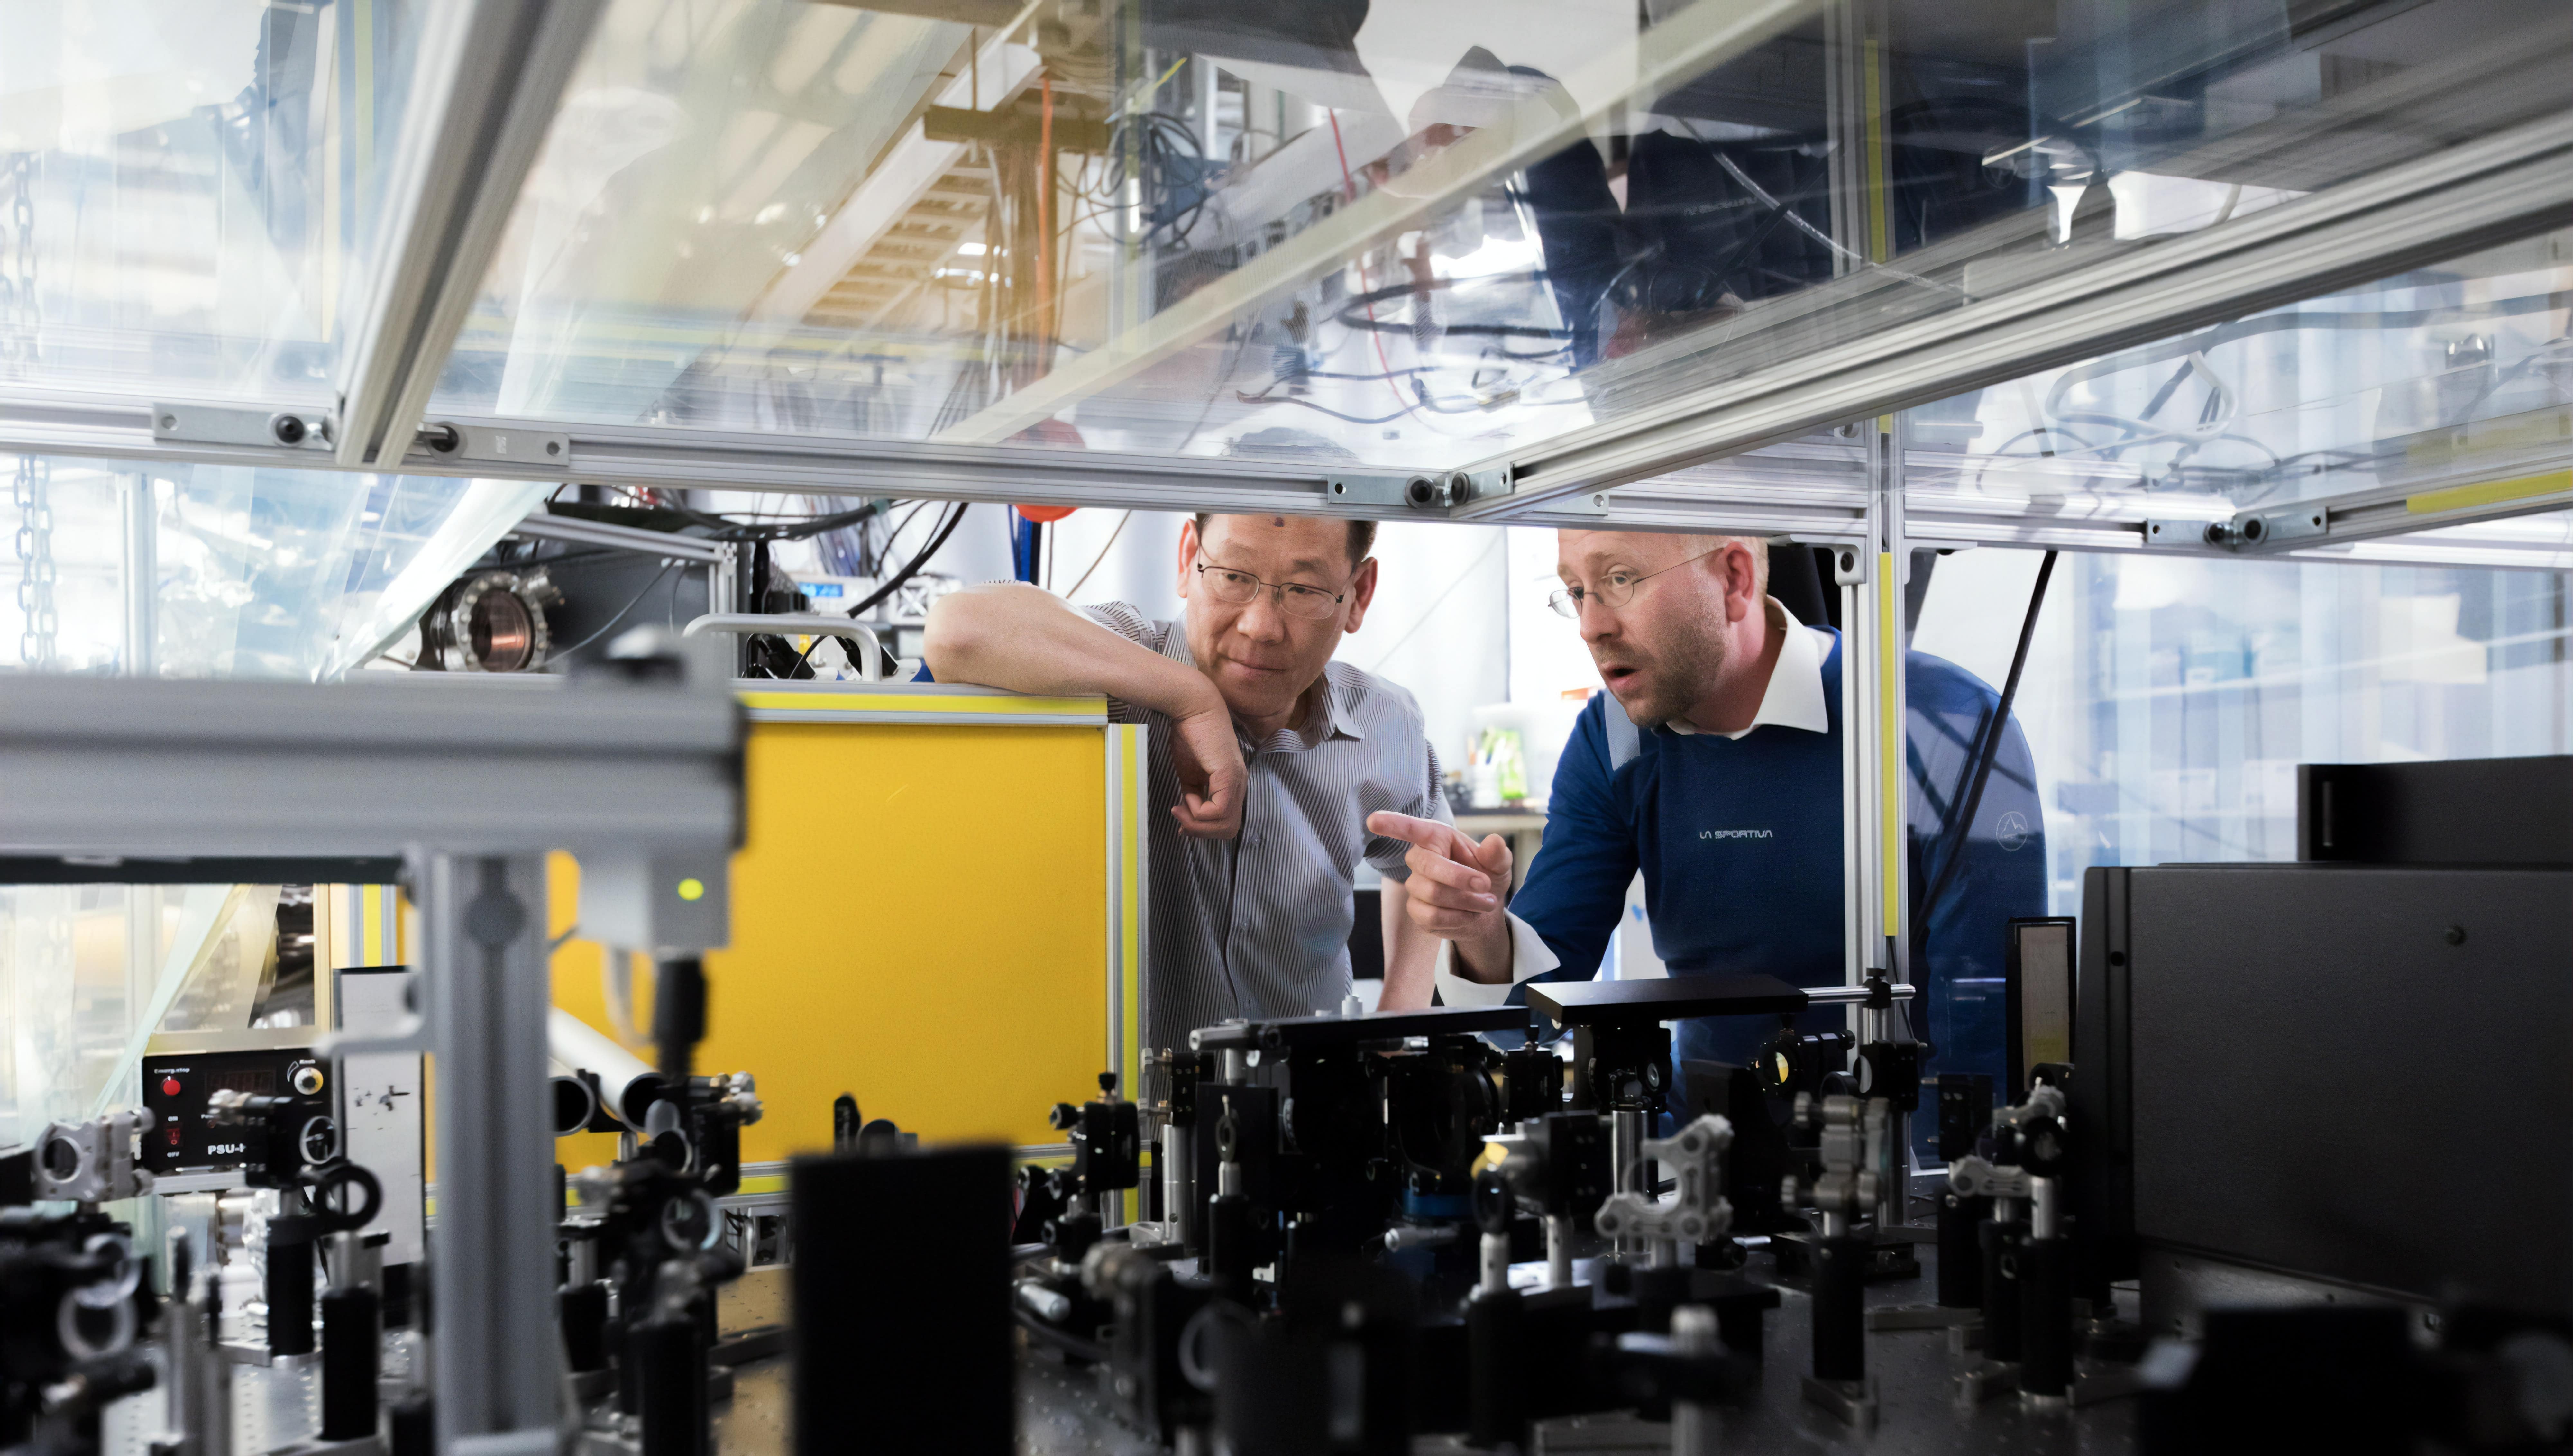 How Industry 4.0 Technology is Solving the Skills Gap